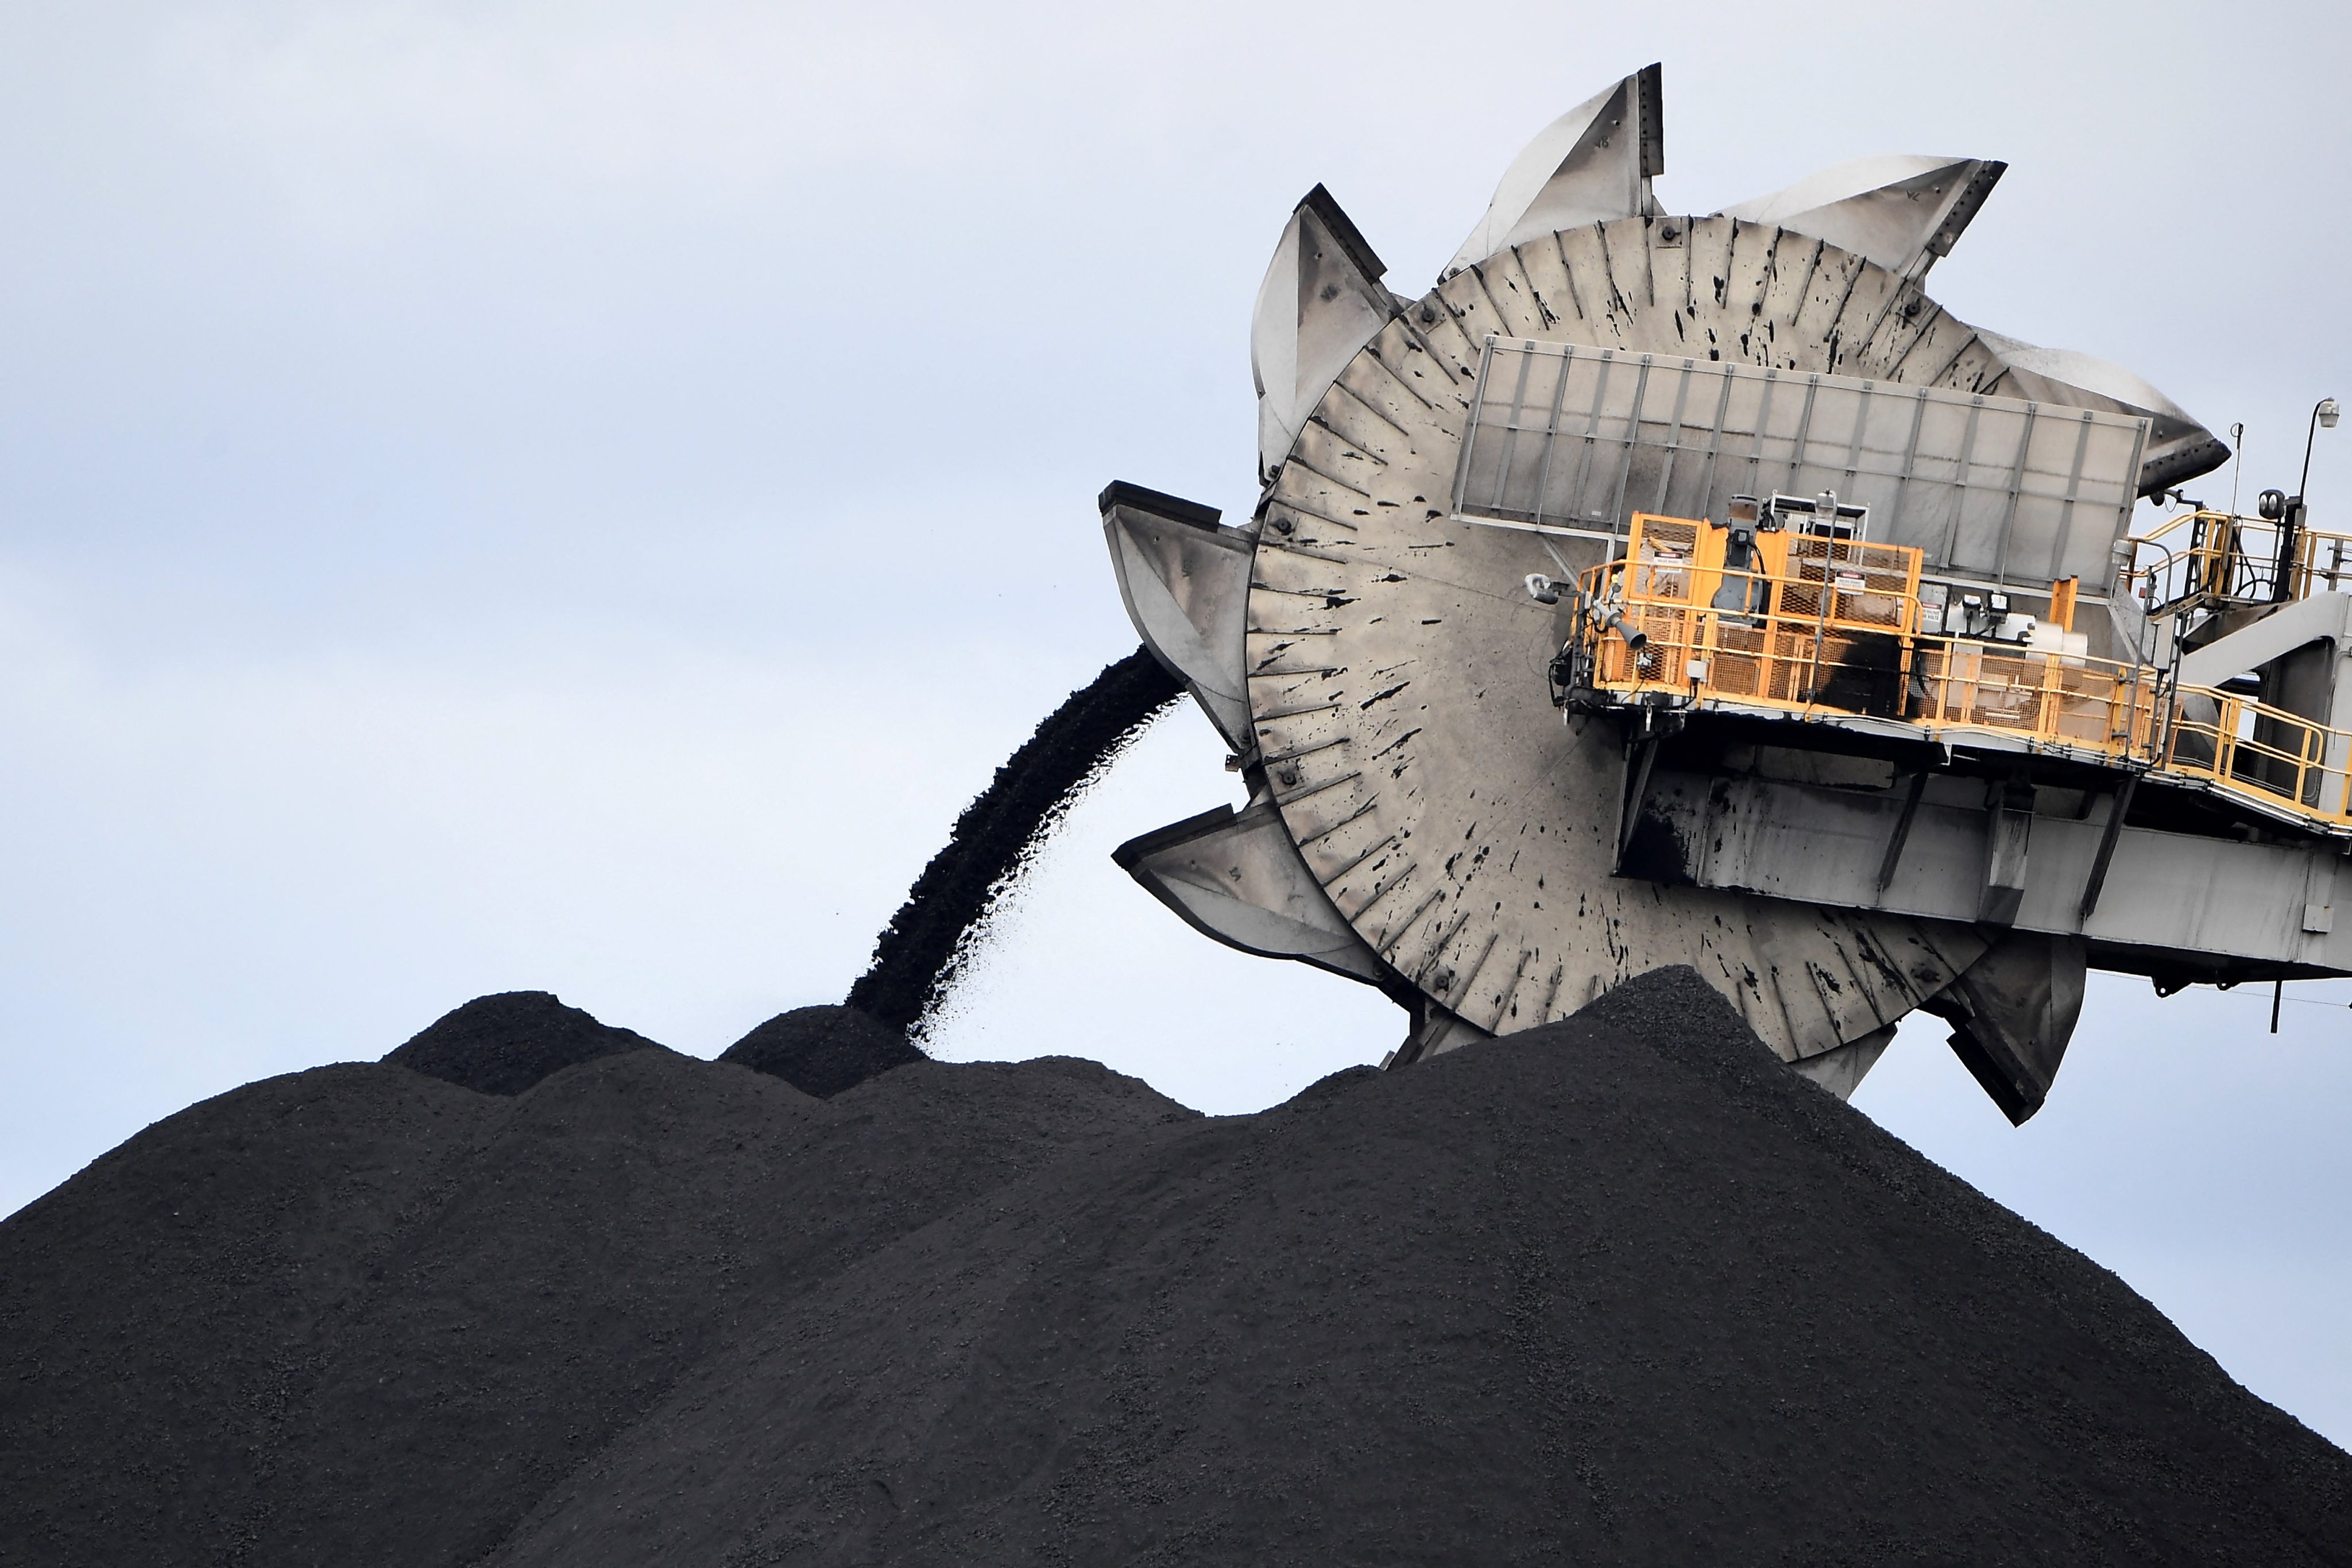 A machine removes soil and sand from coal in Newcastle, Australia, the world’s largest coal exporting port. Photo: AFP